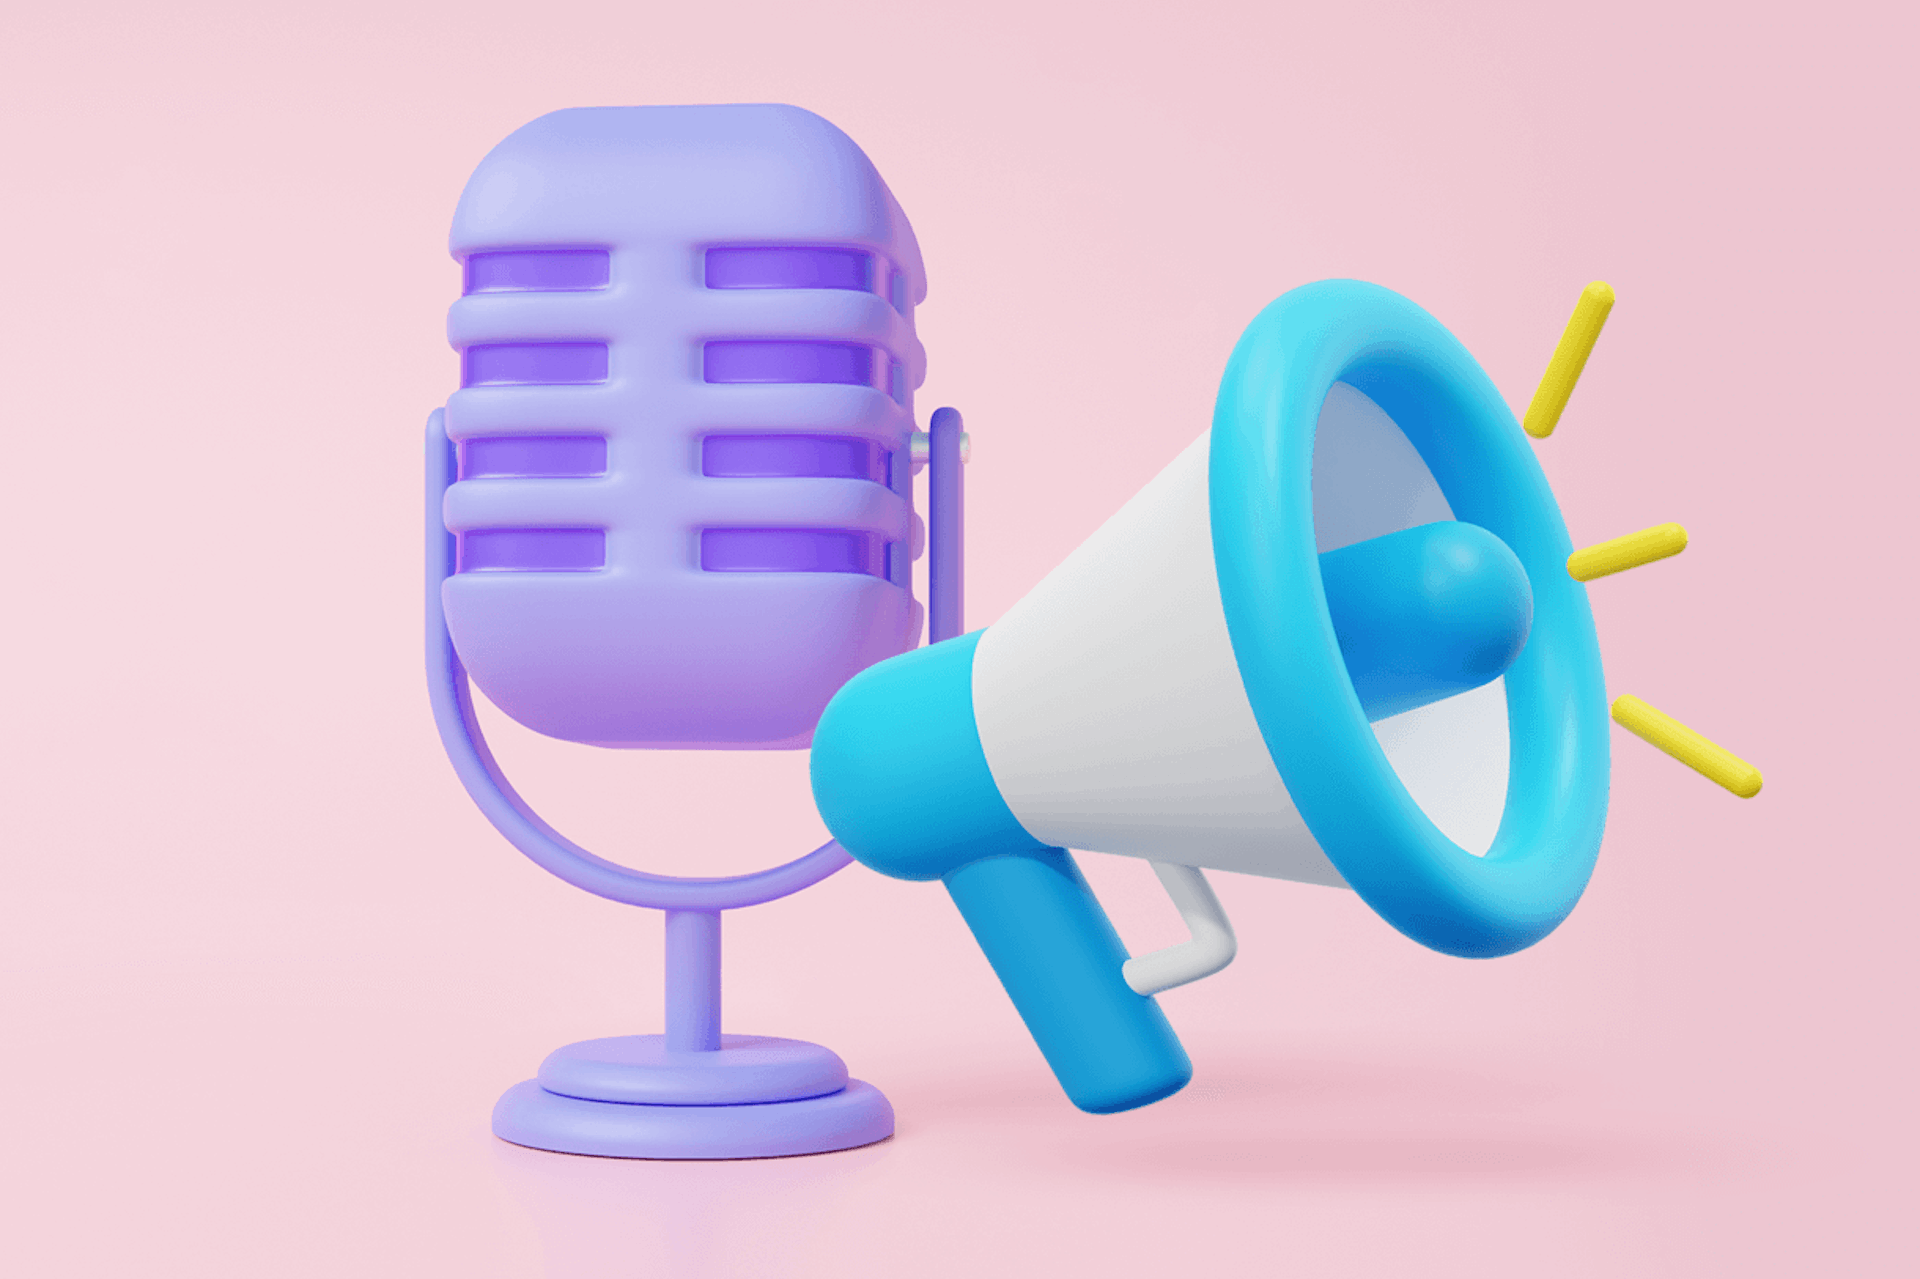 Image of a purple old fashioned microphone next to a loudspeaker on a pale pink background. Best PR podcasts blog post.